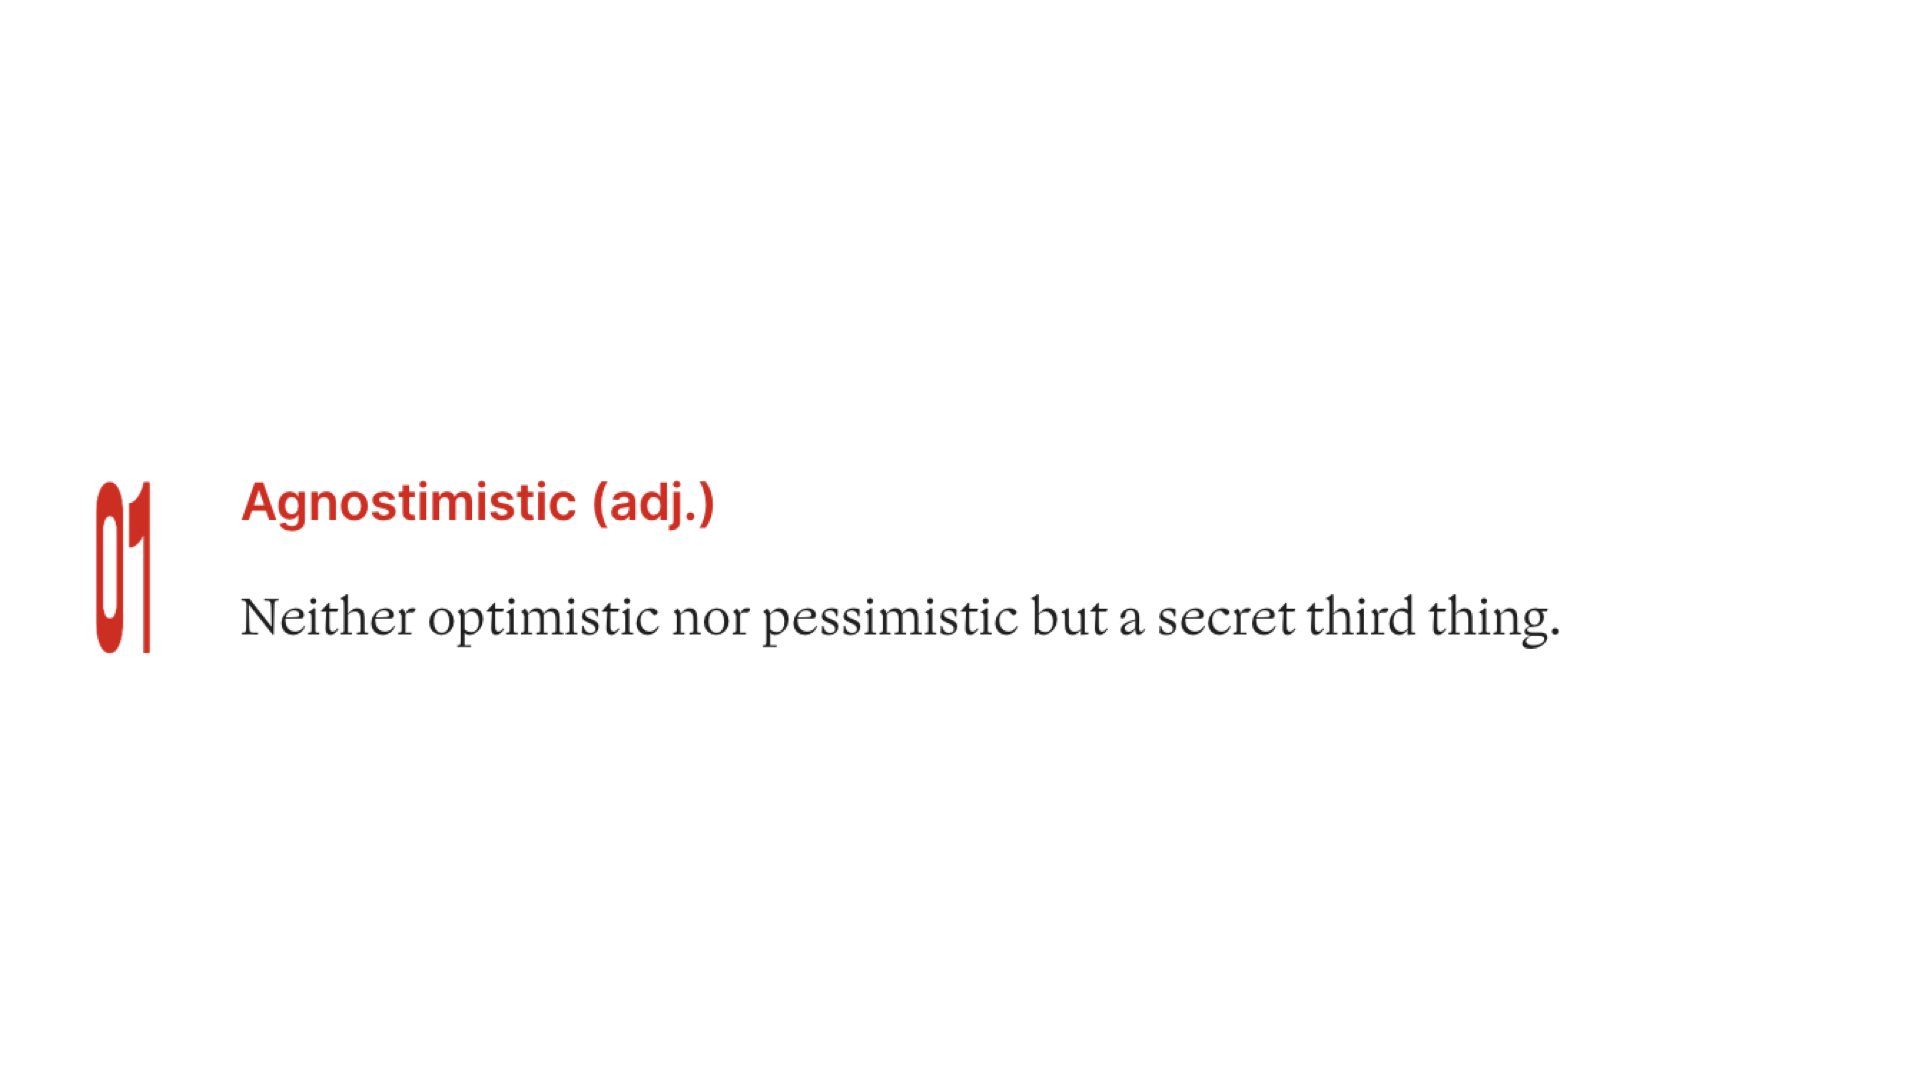 Text provides a dictionary-style definition of the neologism "agnostimistic"